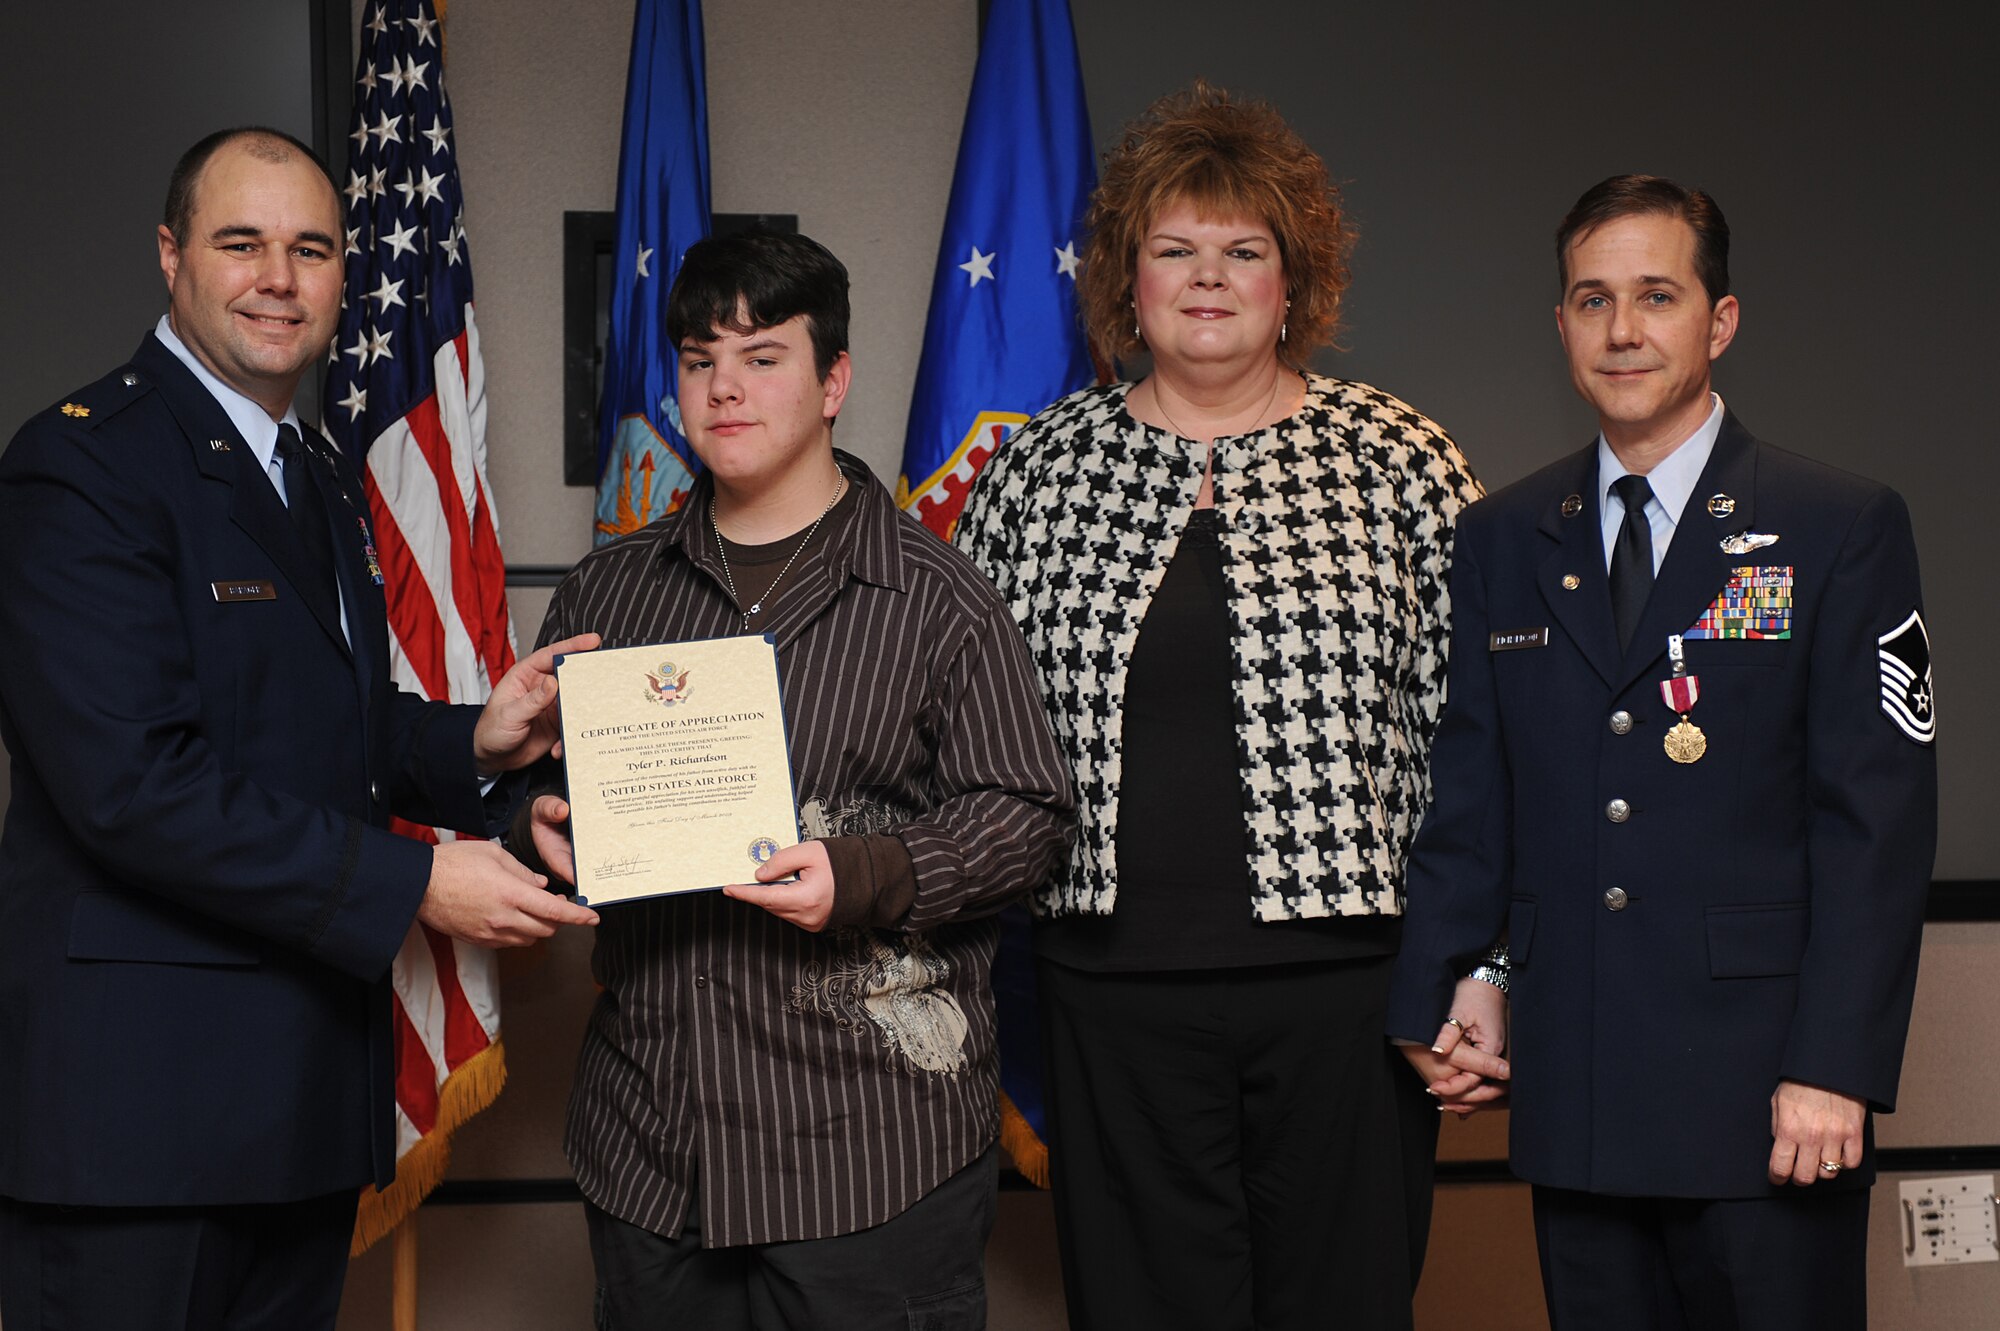 Maj. Robert Barager, Expeditionary Operations School, presents a certificate of appreciation to Tyler, 14-year-old son of Dorothy and Master Sgt. Peter Richardson, during Sergeant Richardson's retirement ceremony in the U.S. Air Force Expeditionary Center on Fort Dix, N.J., Jan. 9, 2009.  Sergeant Richardson was a command tactician for the Combat Aircrew Tactics Studies Course.  He was then selected to fulfill the position of course director for the CATS Course in his last years at the Expeditionary Center. (U.S. Air Force Photo/Staff Sgt. Nathan Bevier)